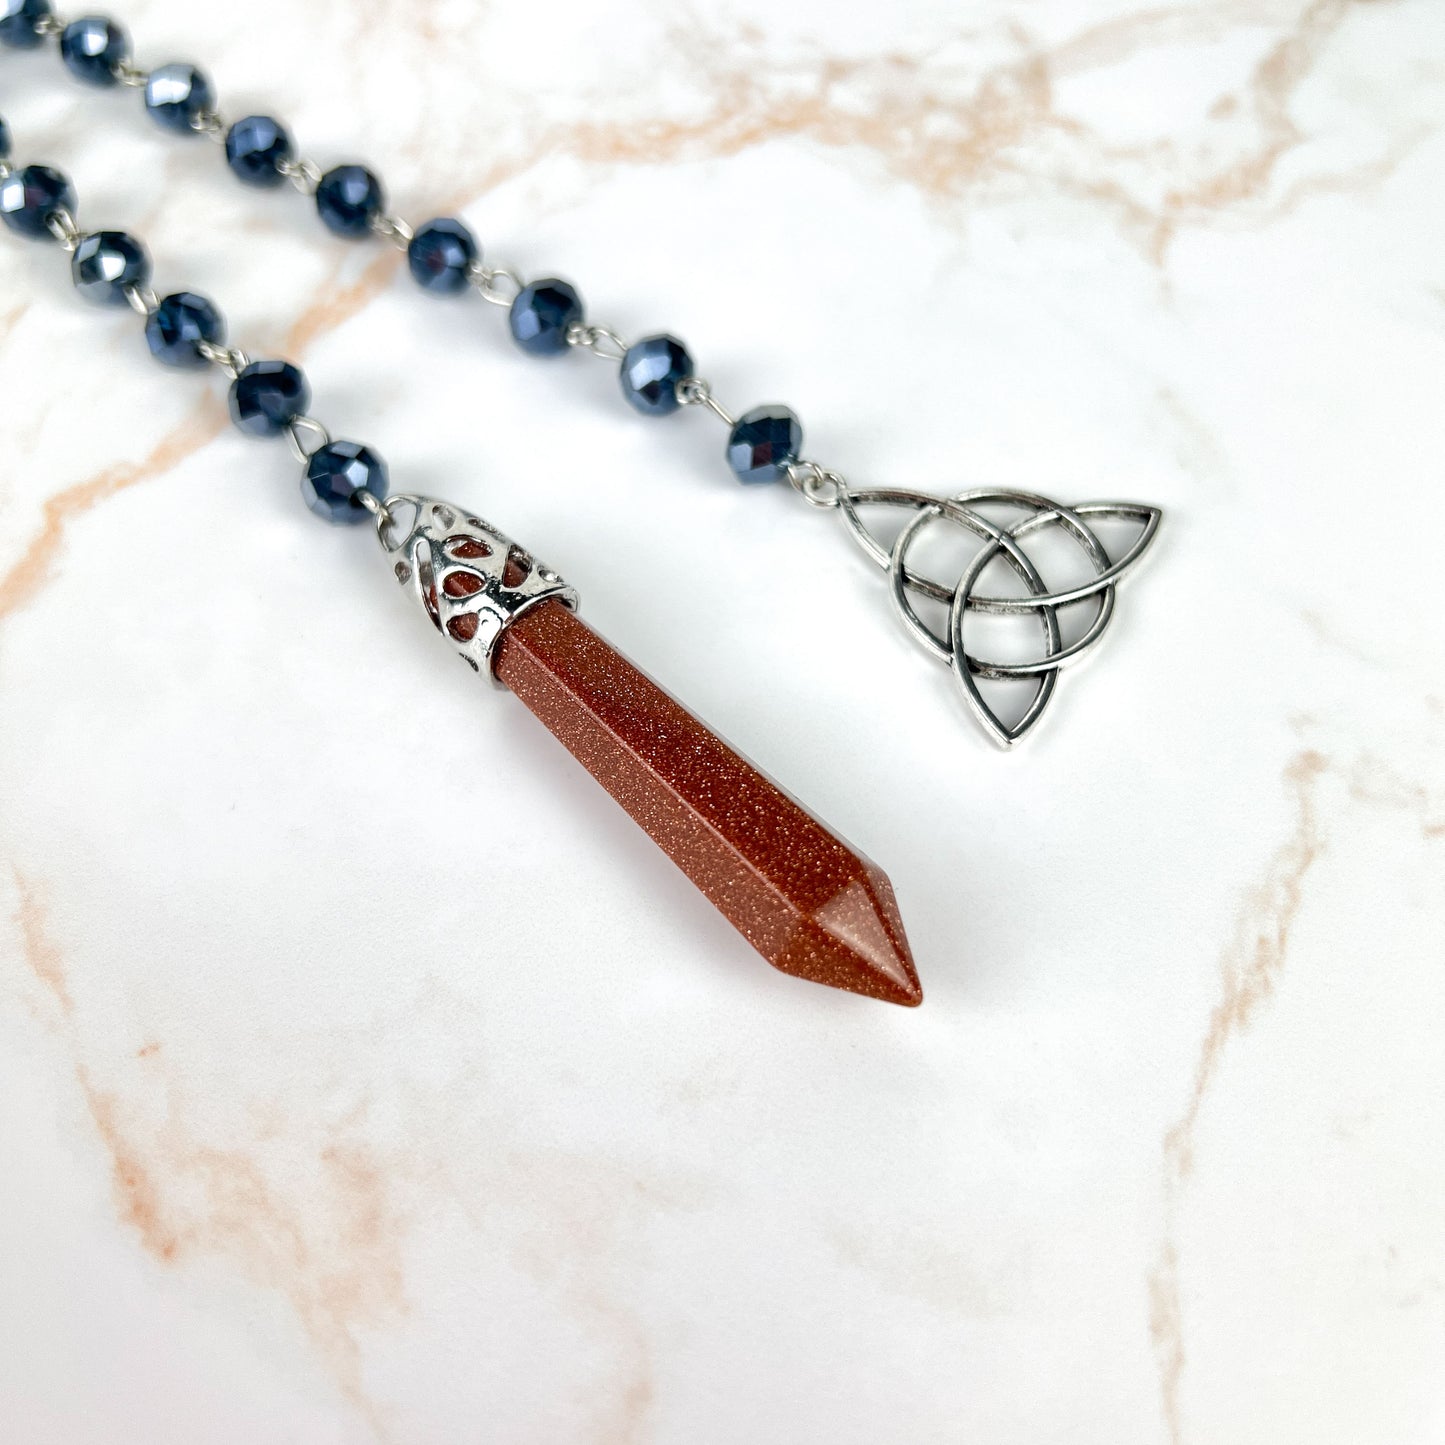 Goldstone pendulum, rosary chain and triquetra charm